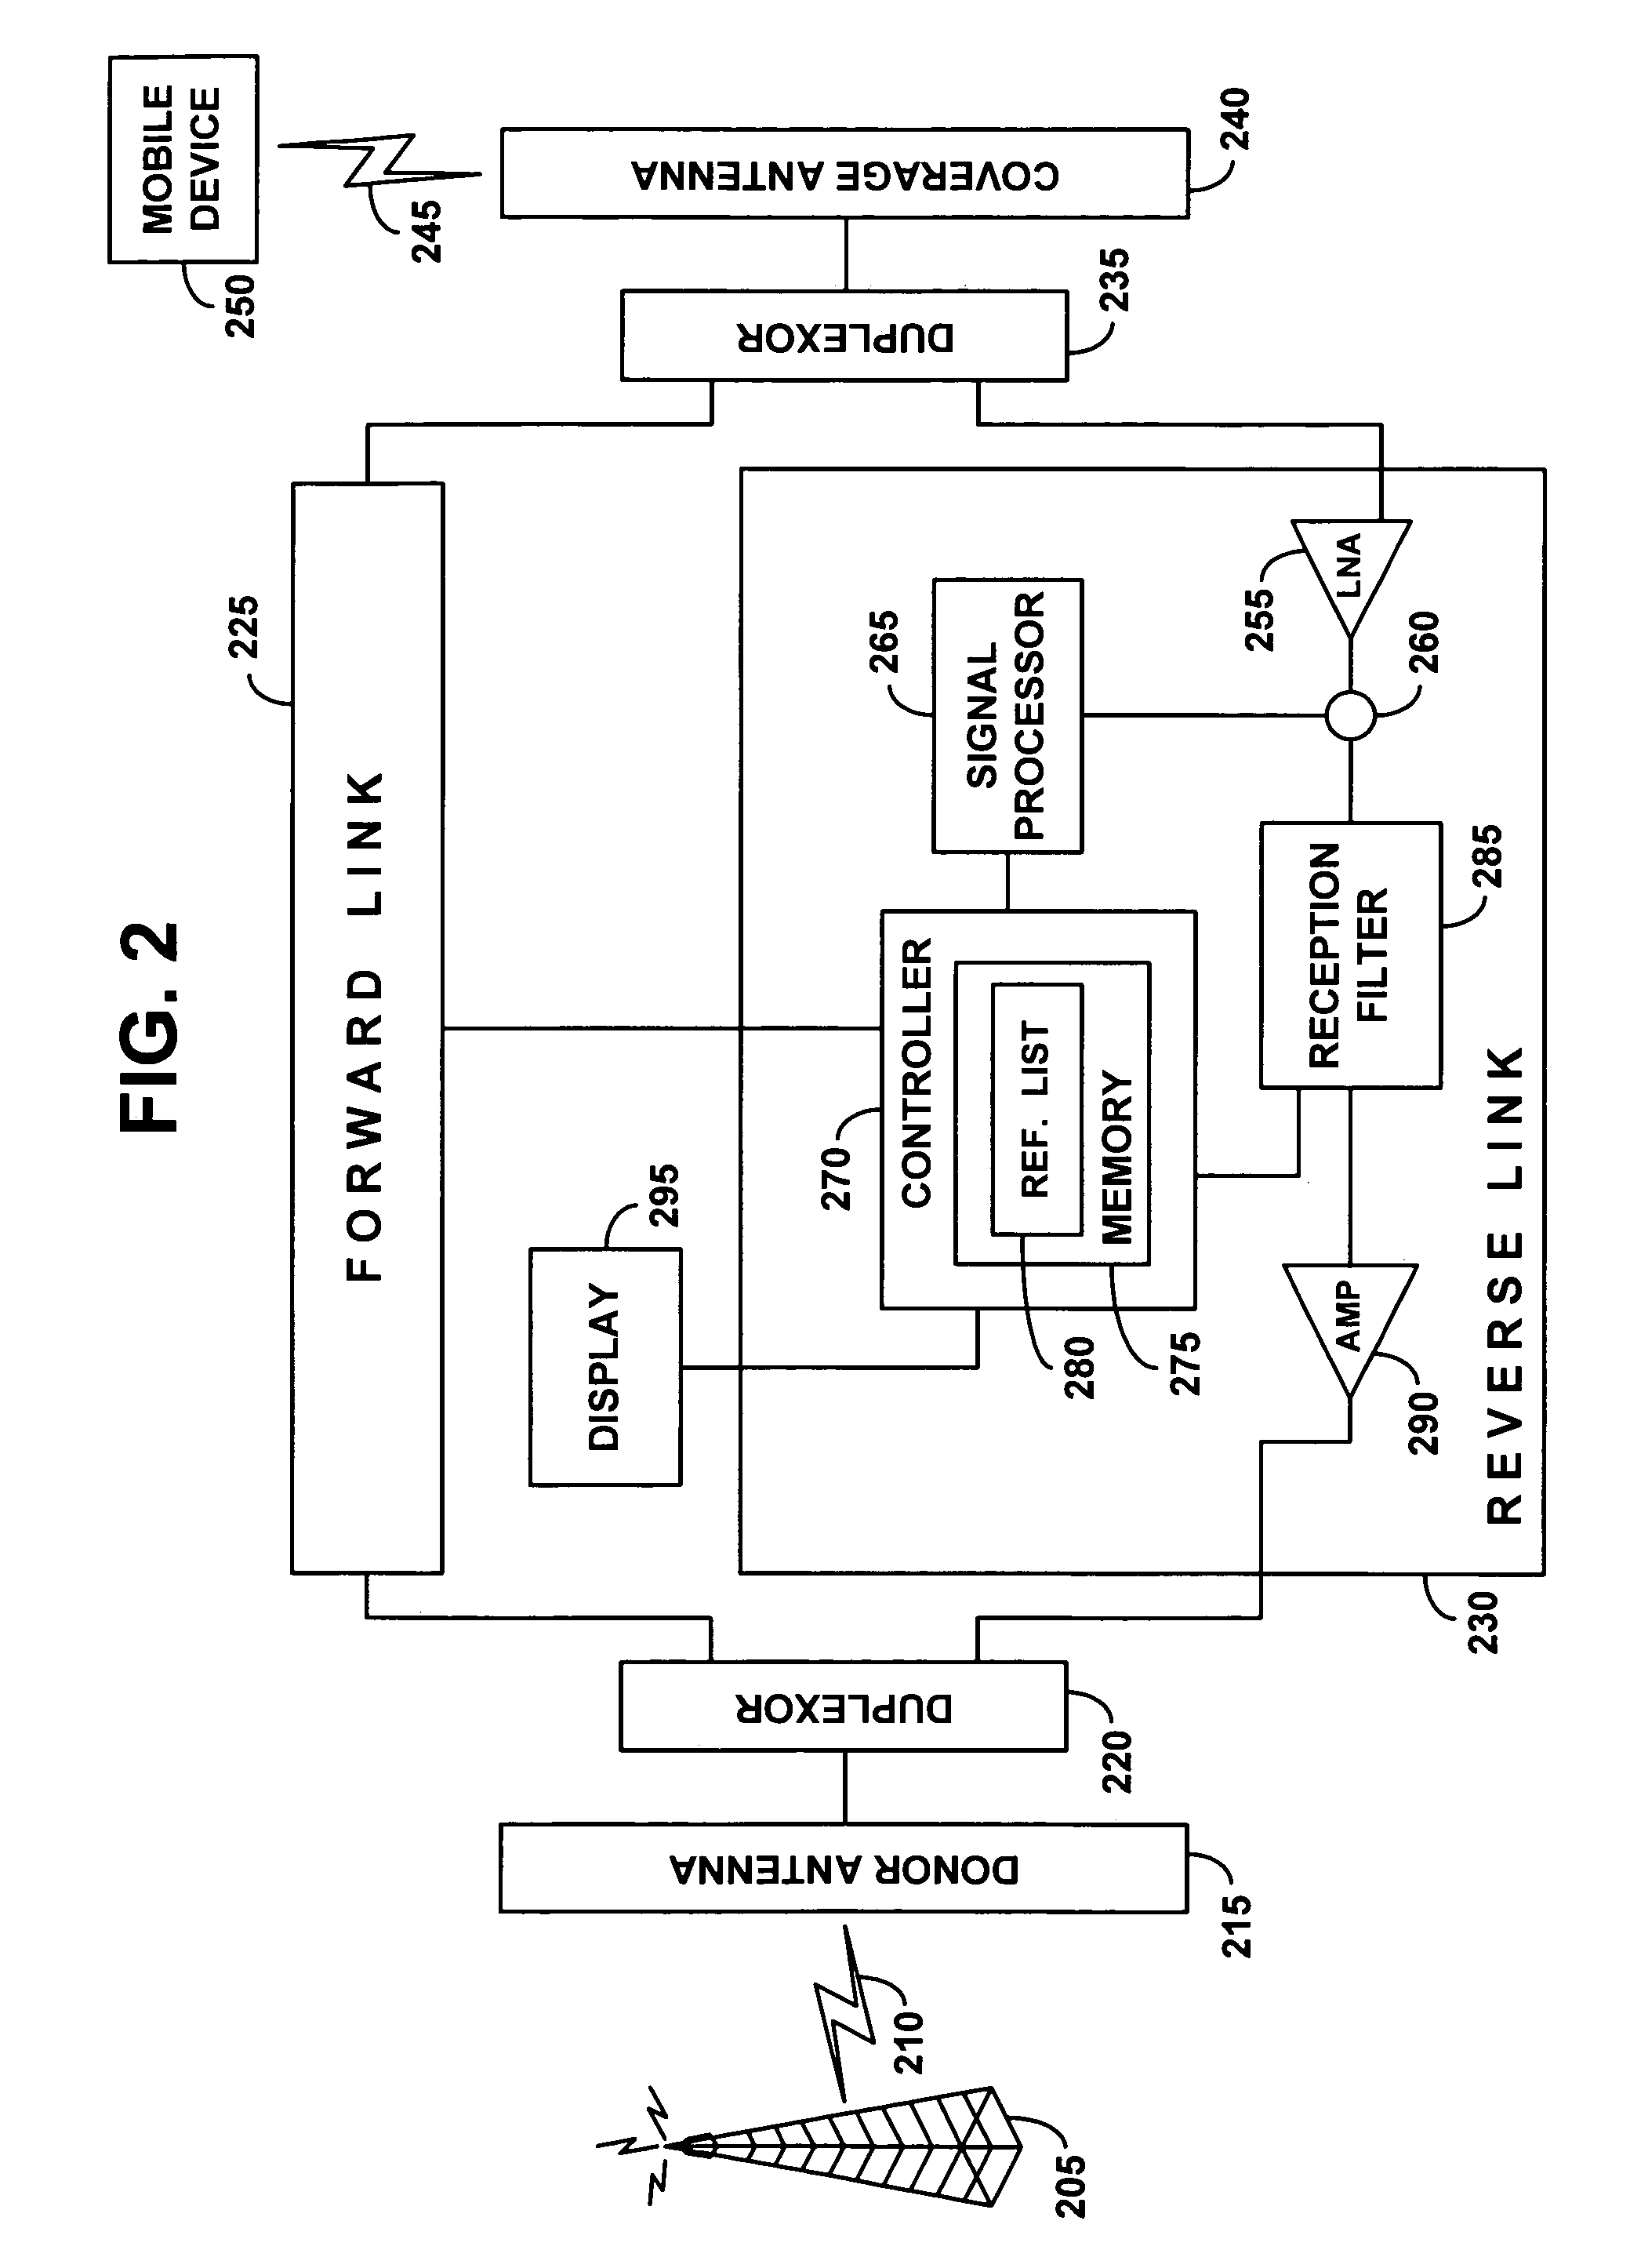 Radio frequency repeater with automated block/channel selection